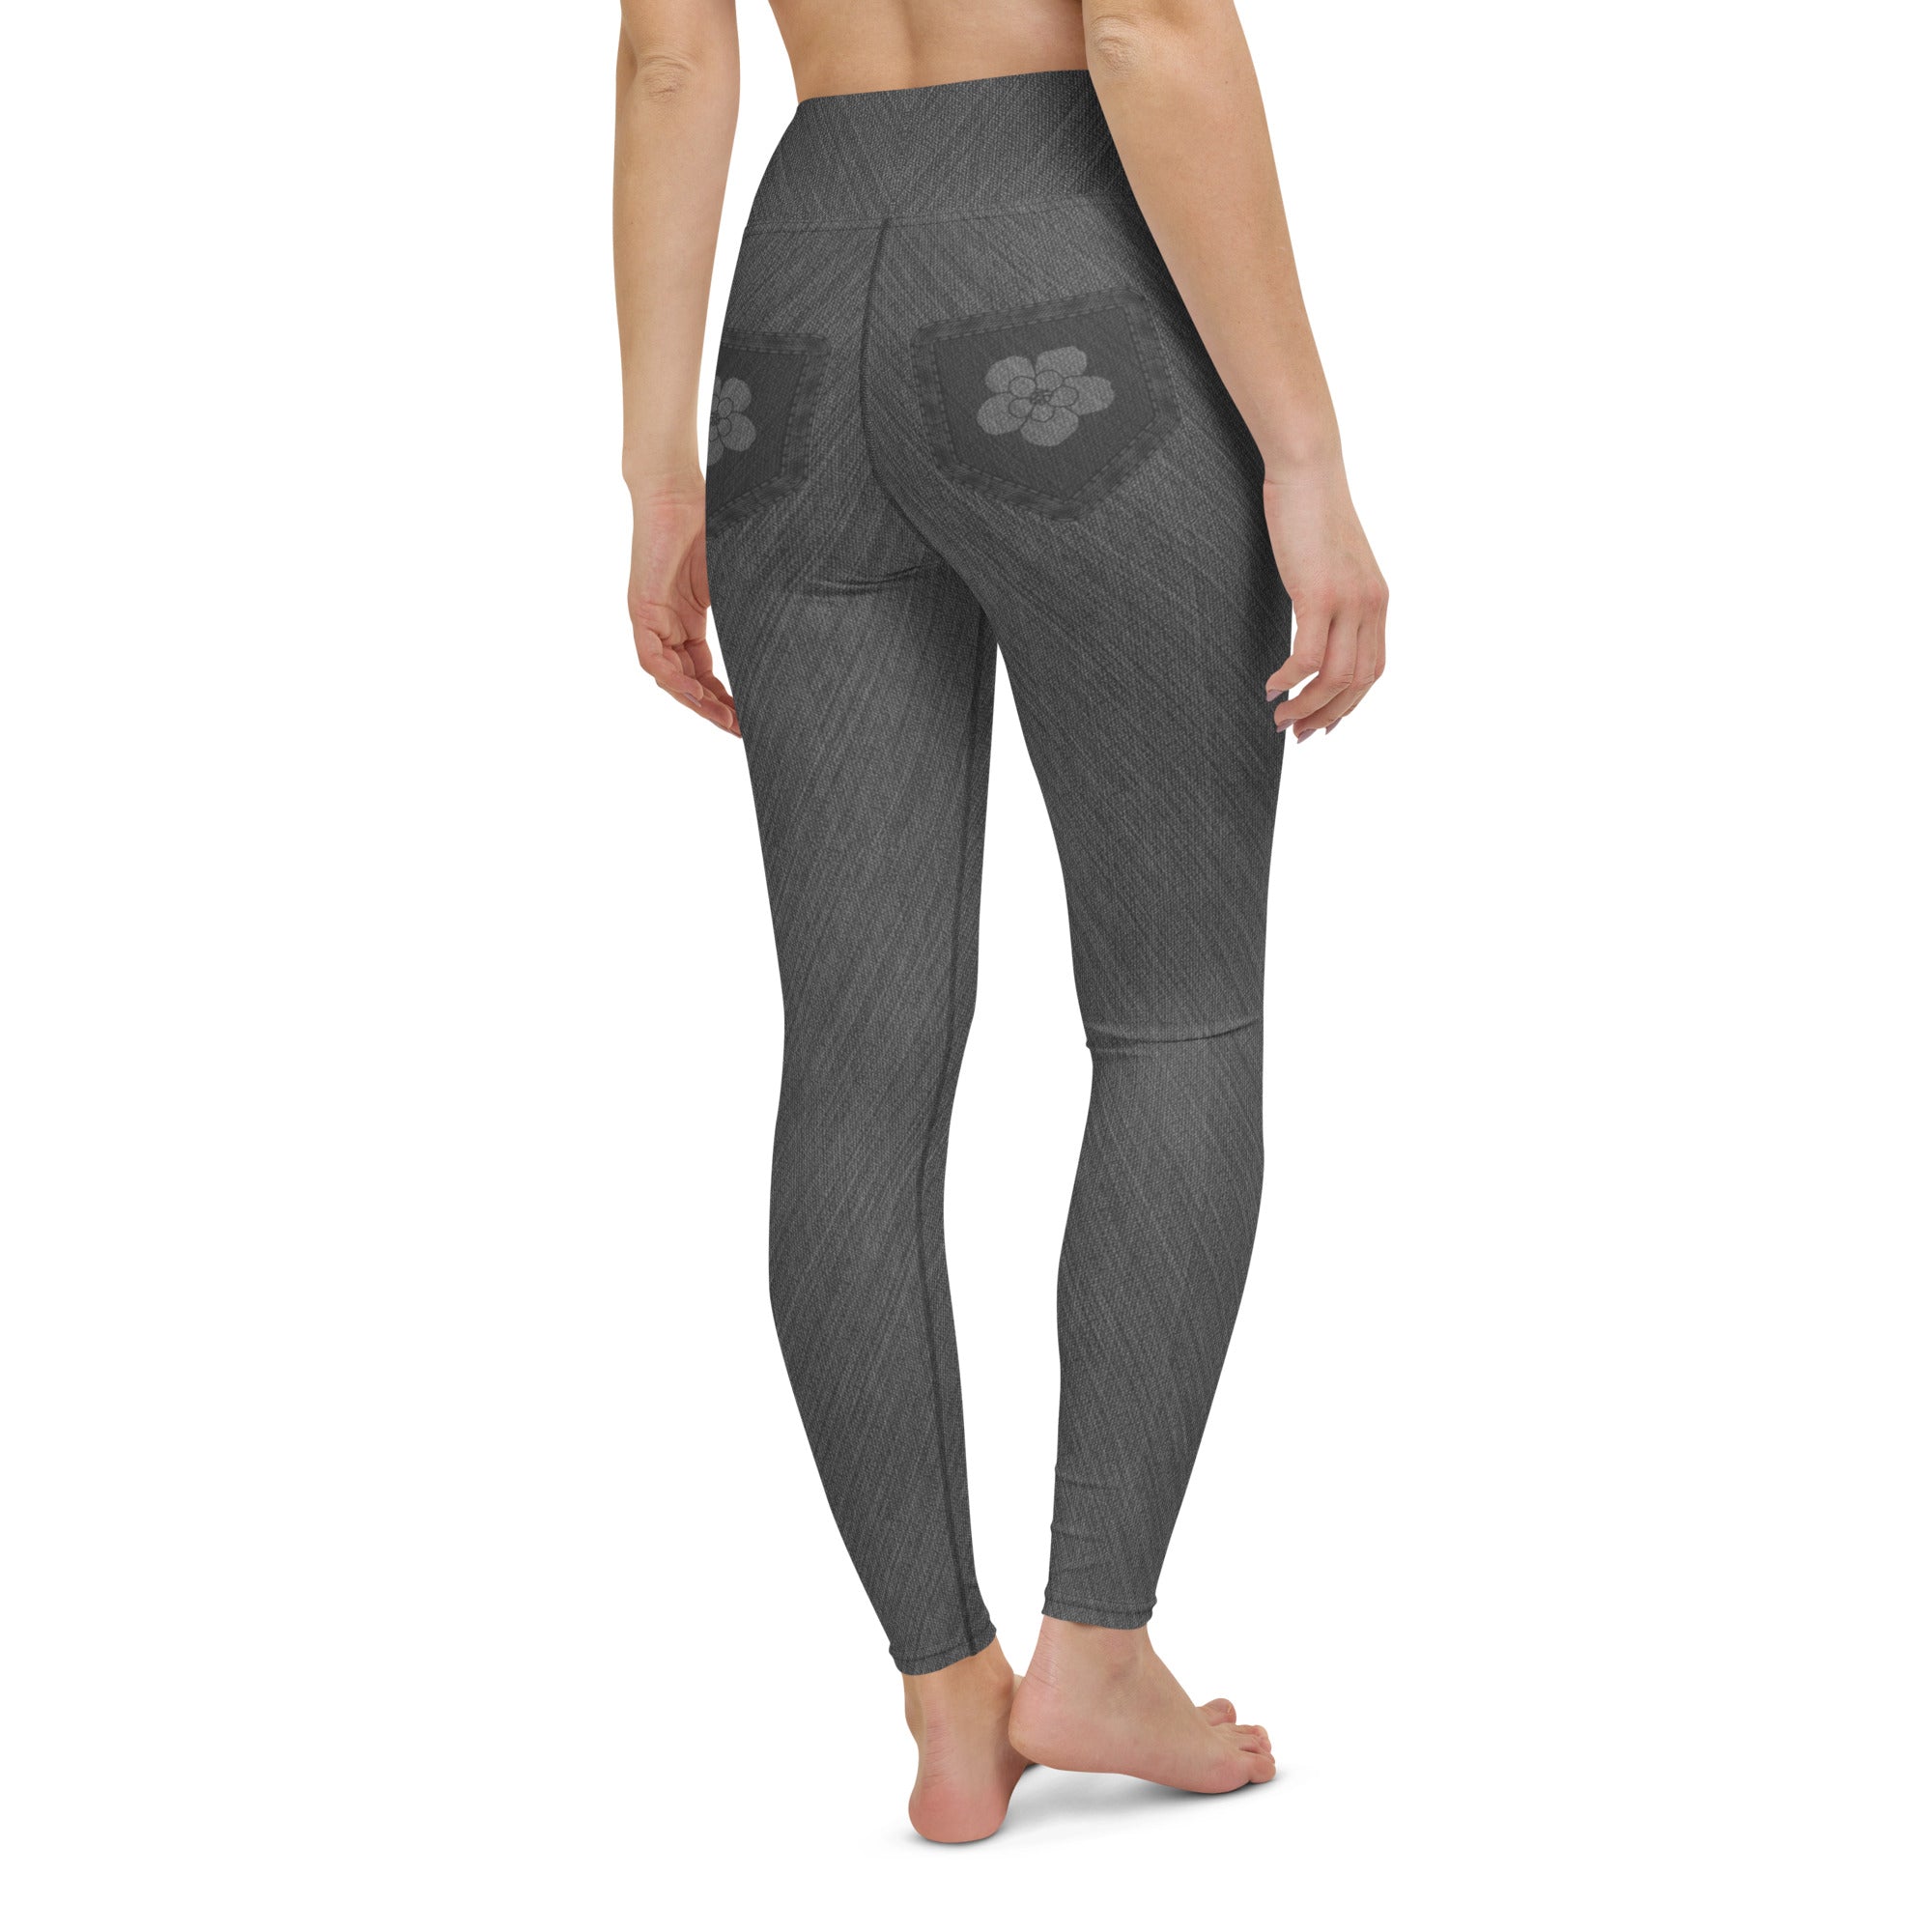 Edgy Distressed Denim Yoga Leggings Perfect for Any Workout